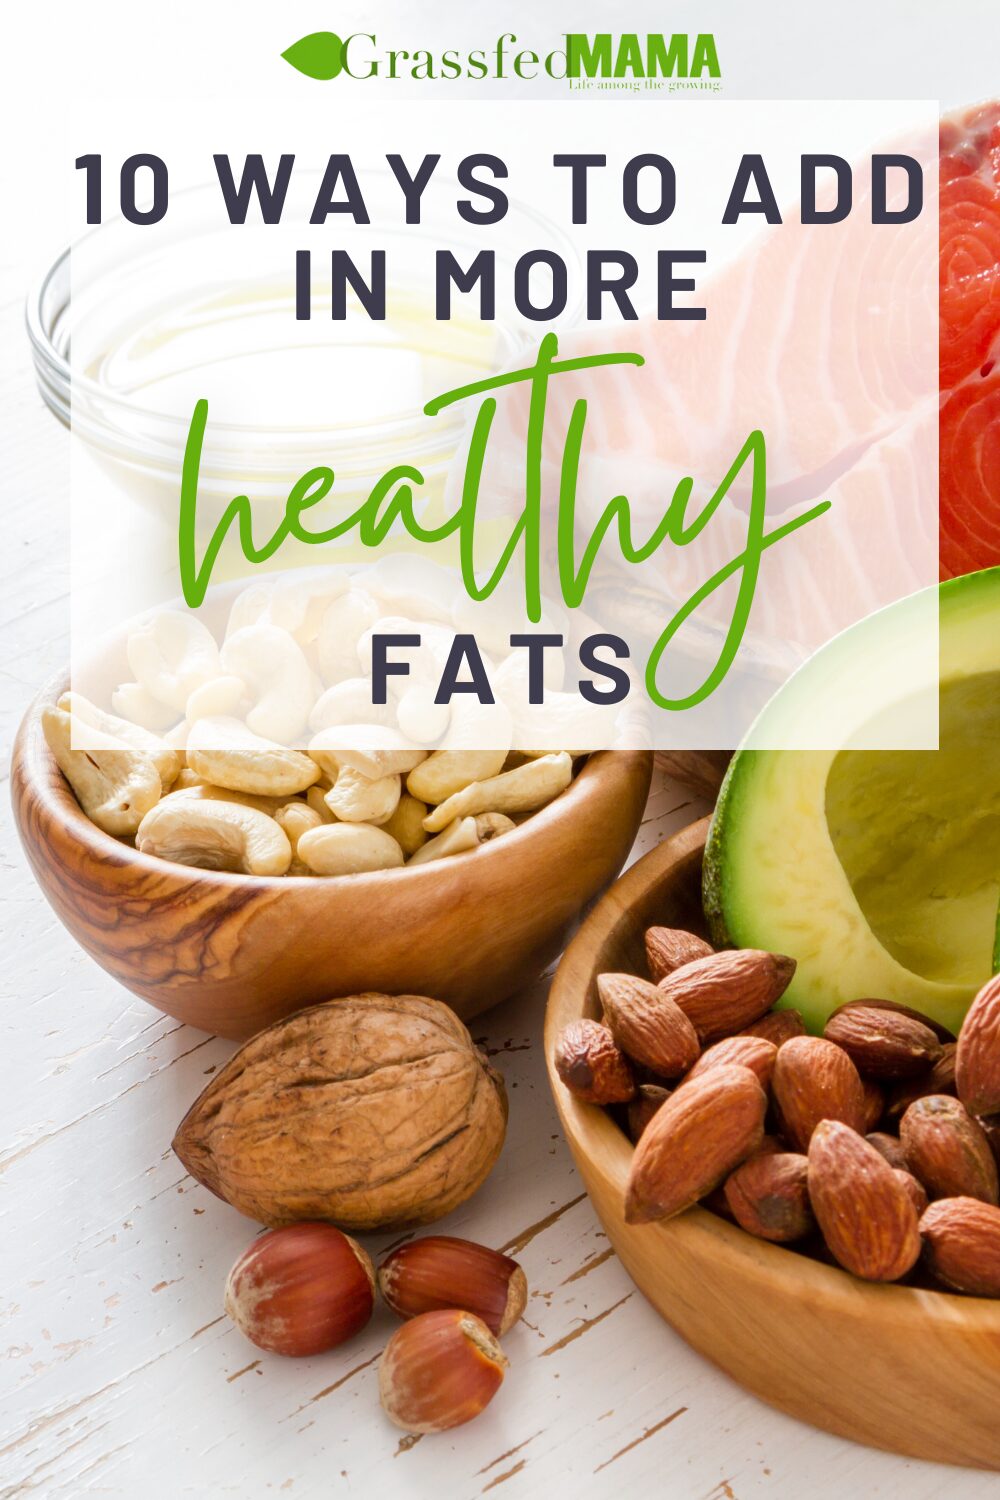 10 Ways to Add in More Healthy Fats